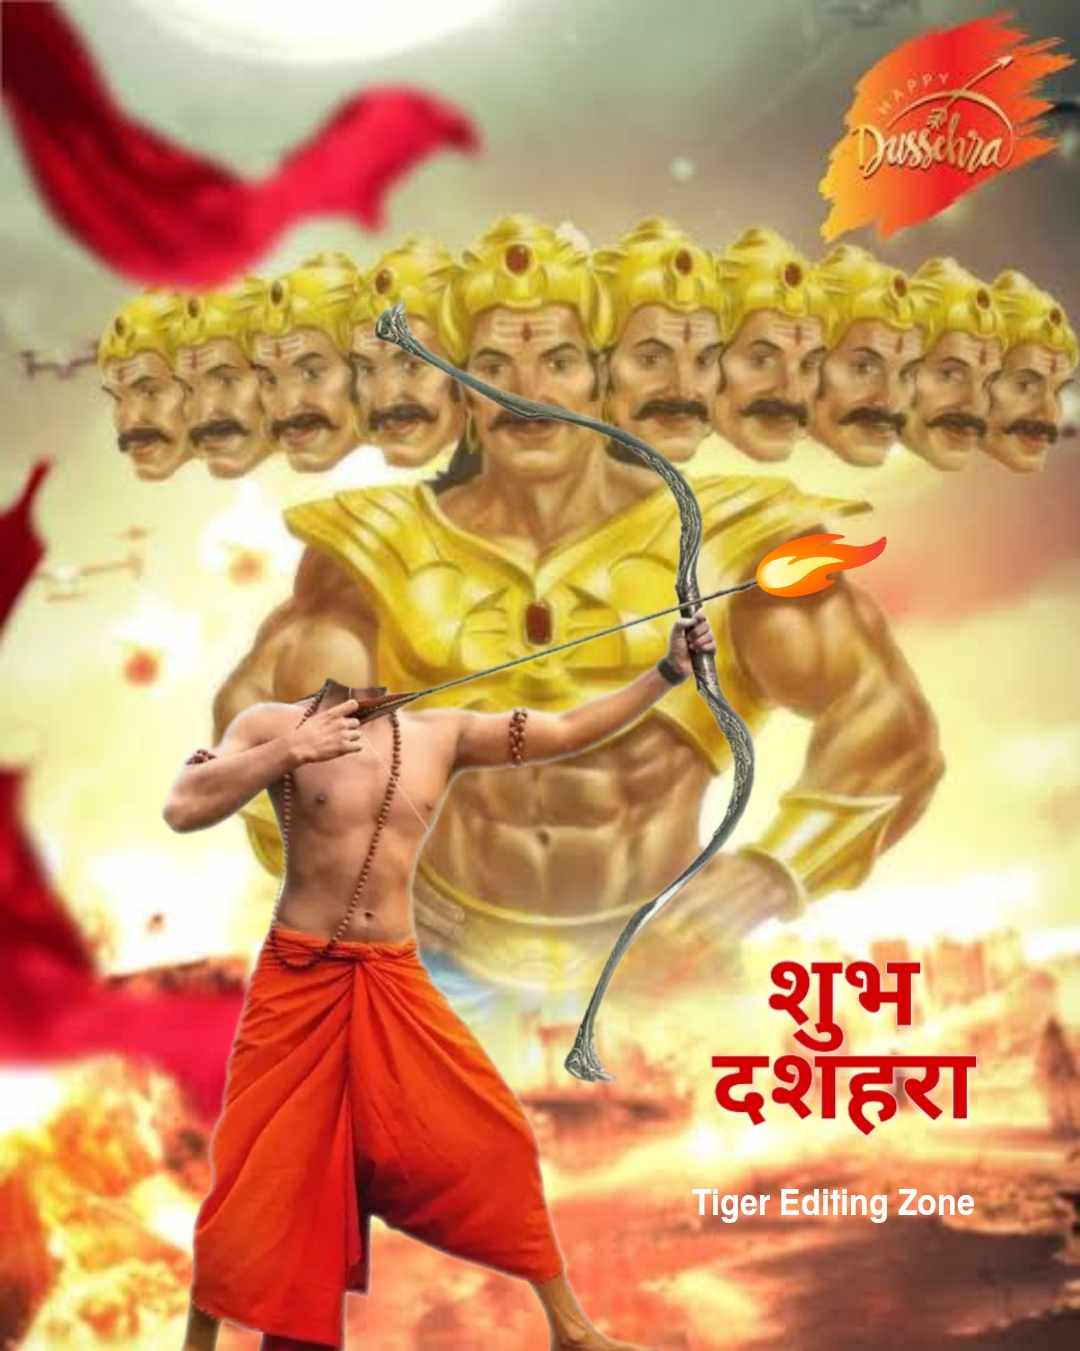 Subh Dussehra Photo Editing Background Image Download